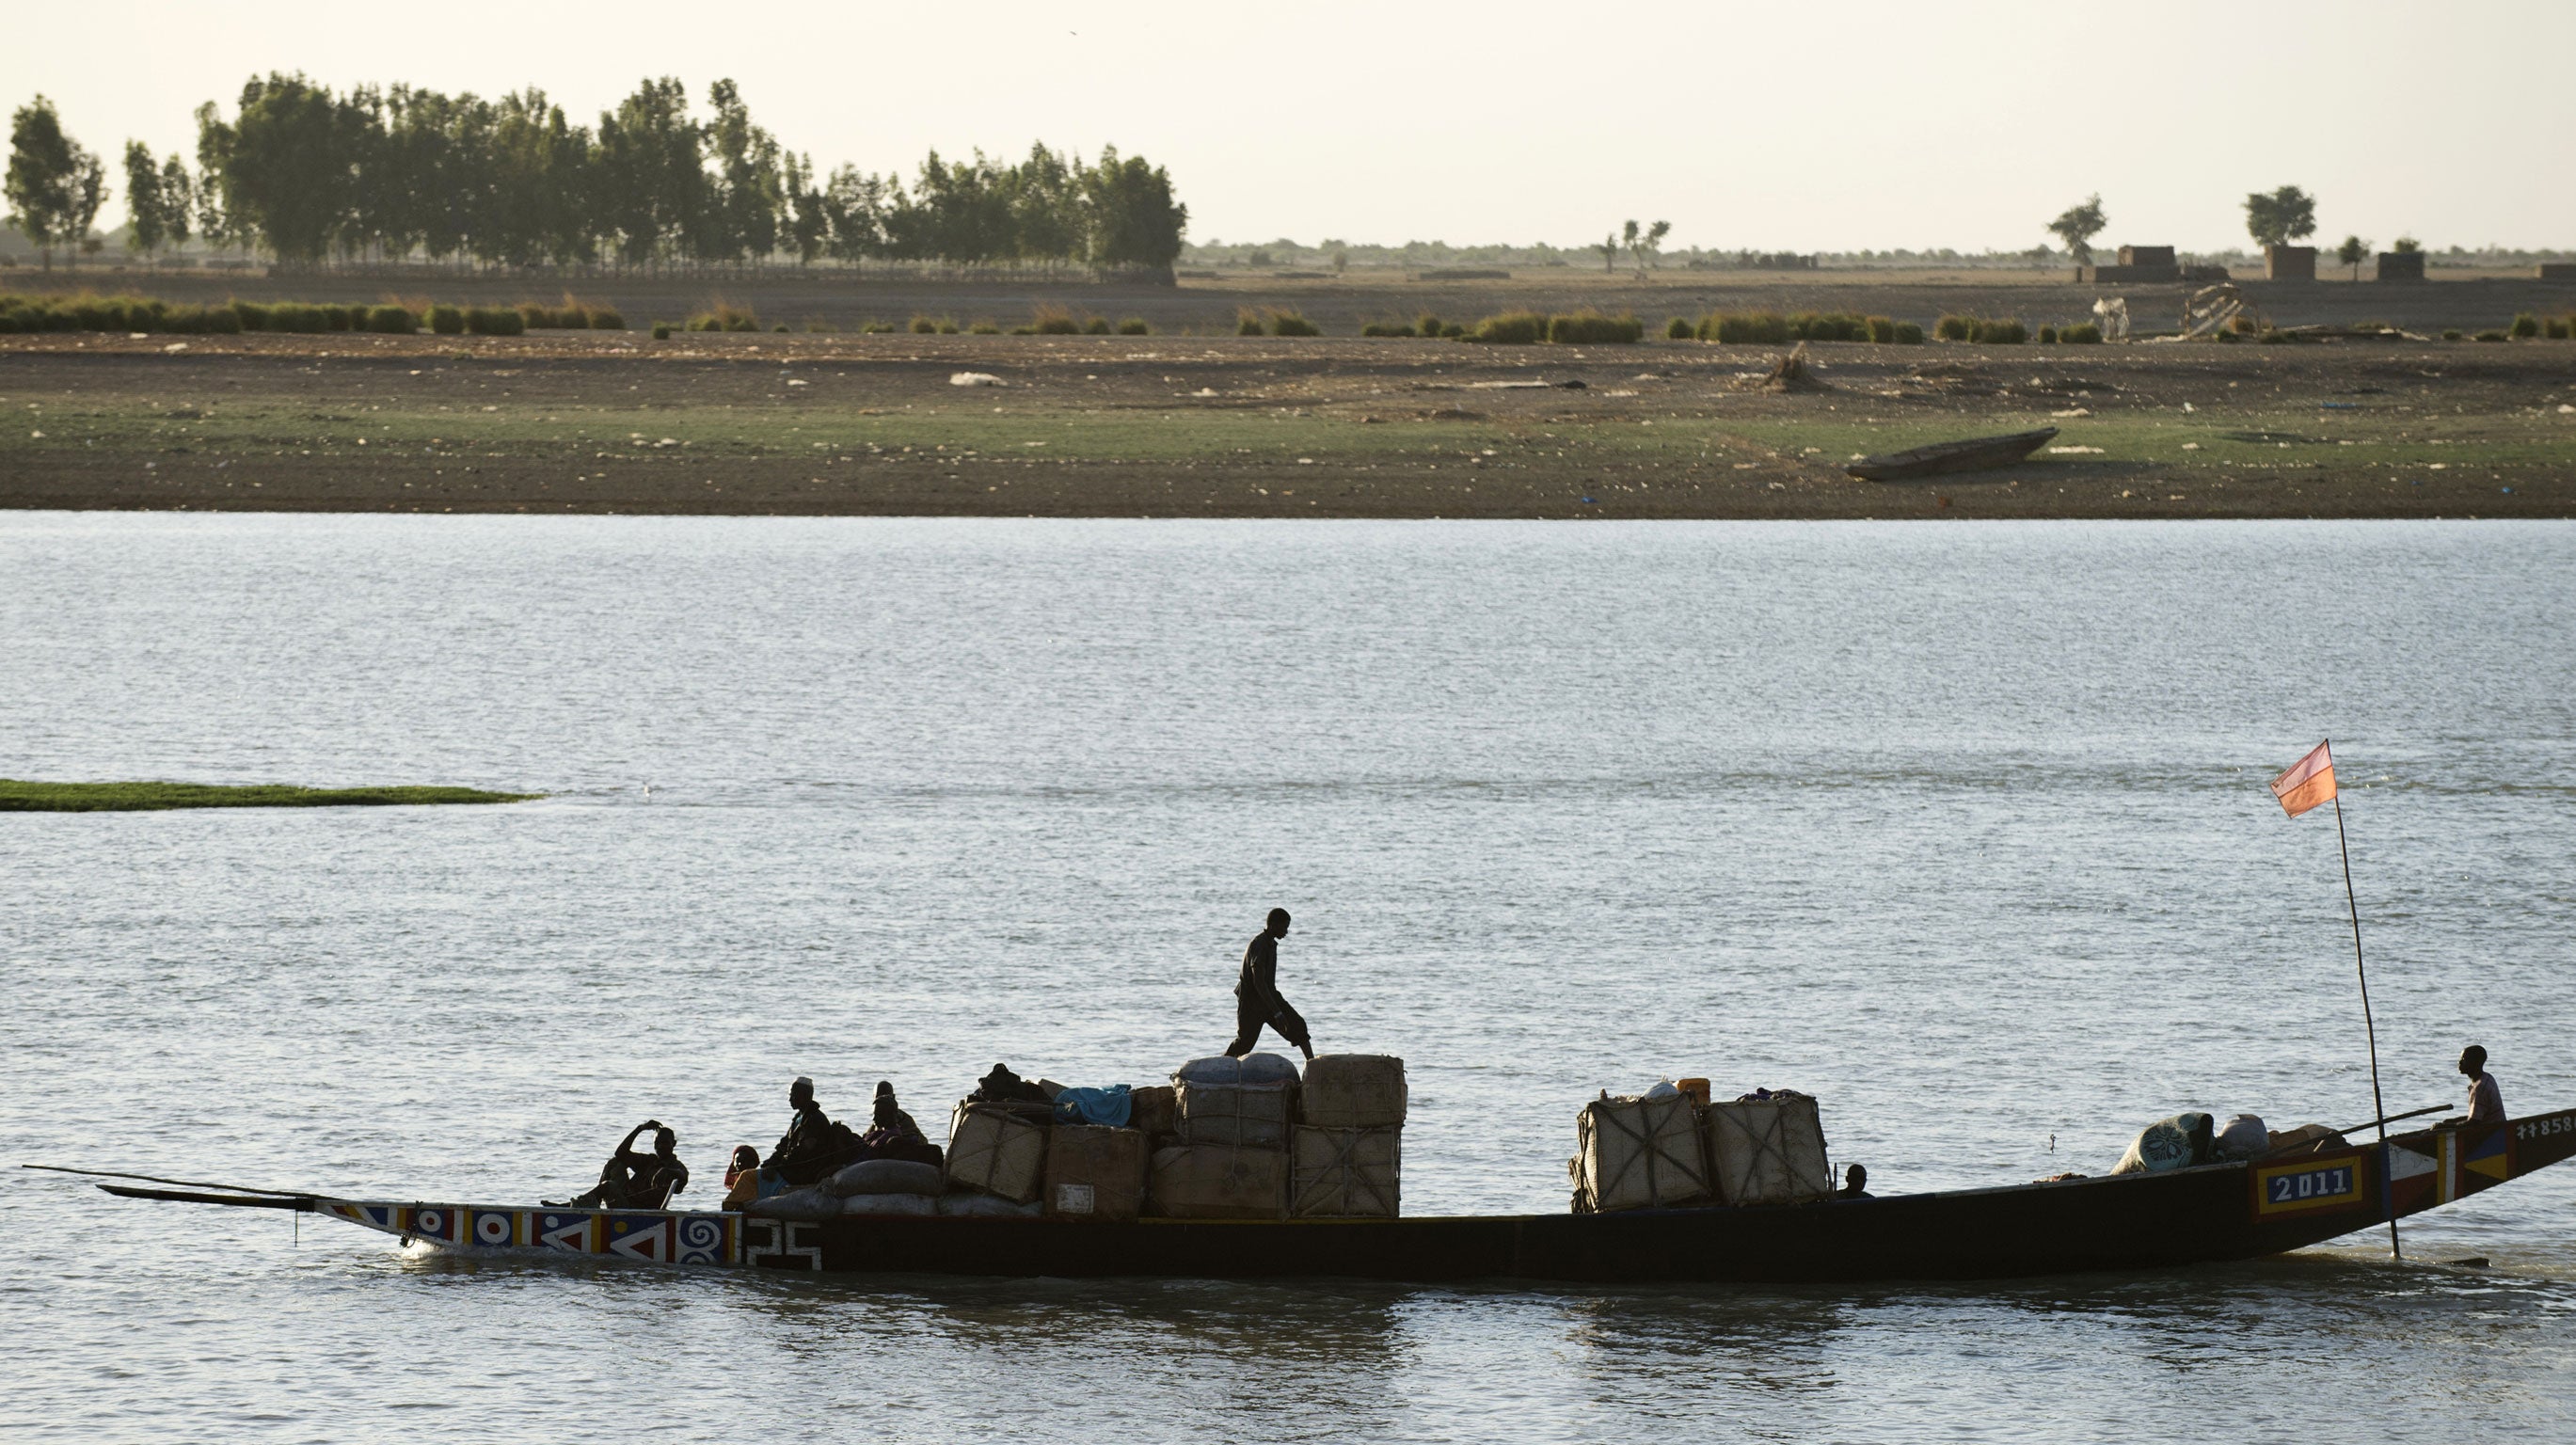 A 'Pinasse' boat approaching the commercial port of Mopti, Mali, on the Niger River